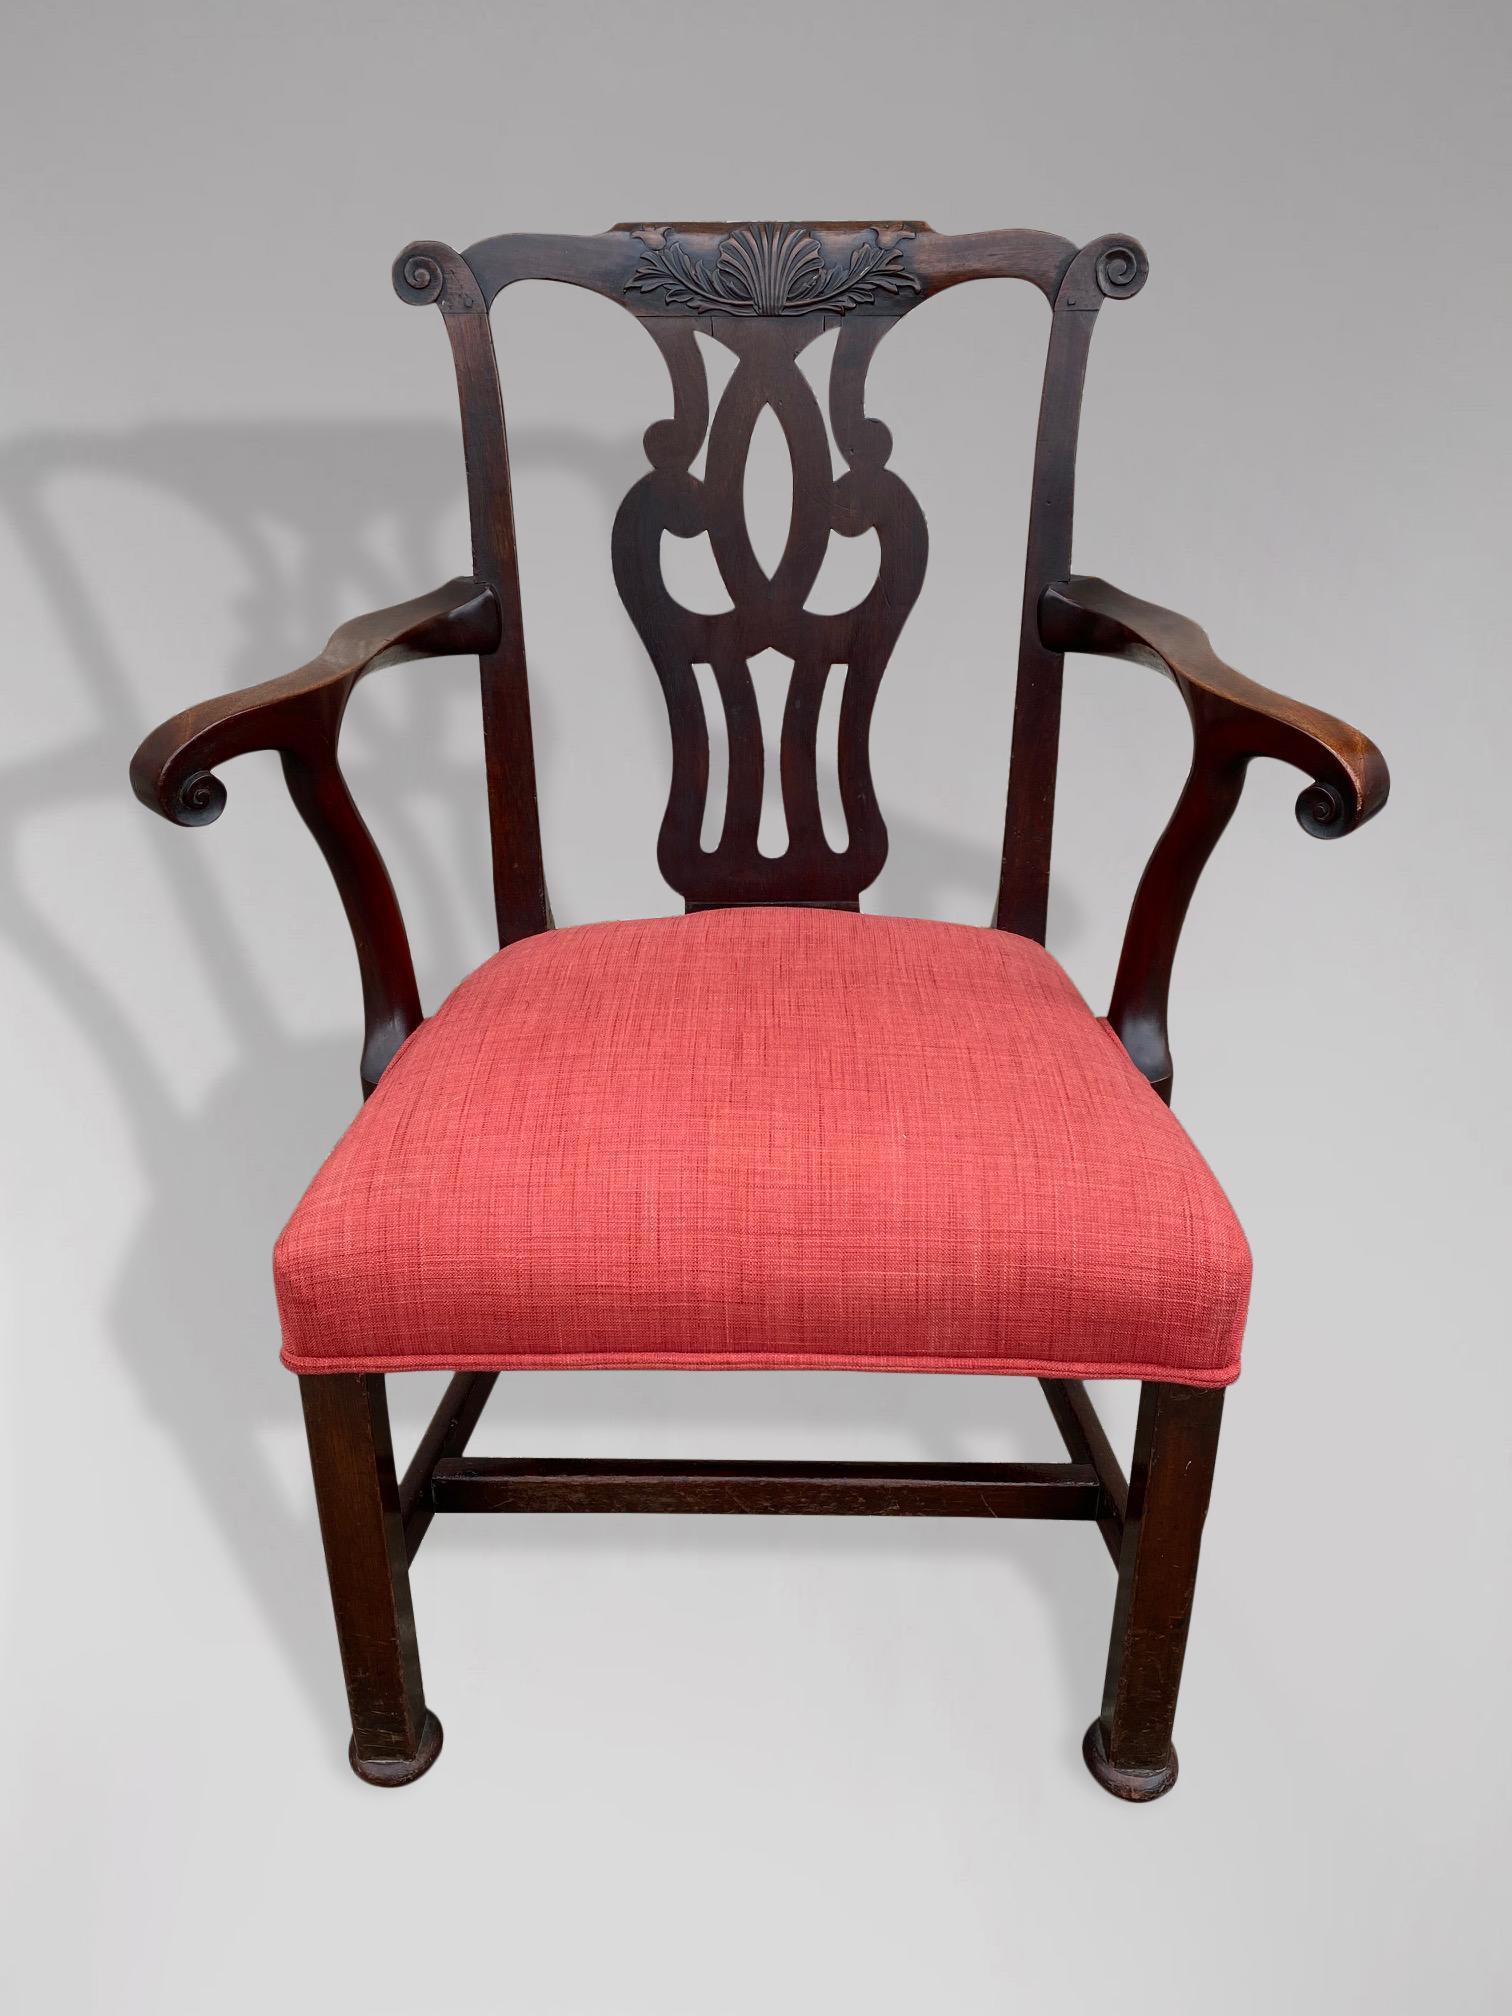 A late 18th century, George III period Chippendale Cuban mahogany armchair, the shaped crest rail with carved 'c' scroll ends above the wide, carved, pierced splat and bold out scrolling arms. The padded upholstered seat raised on moulded